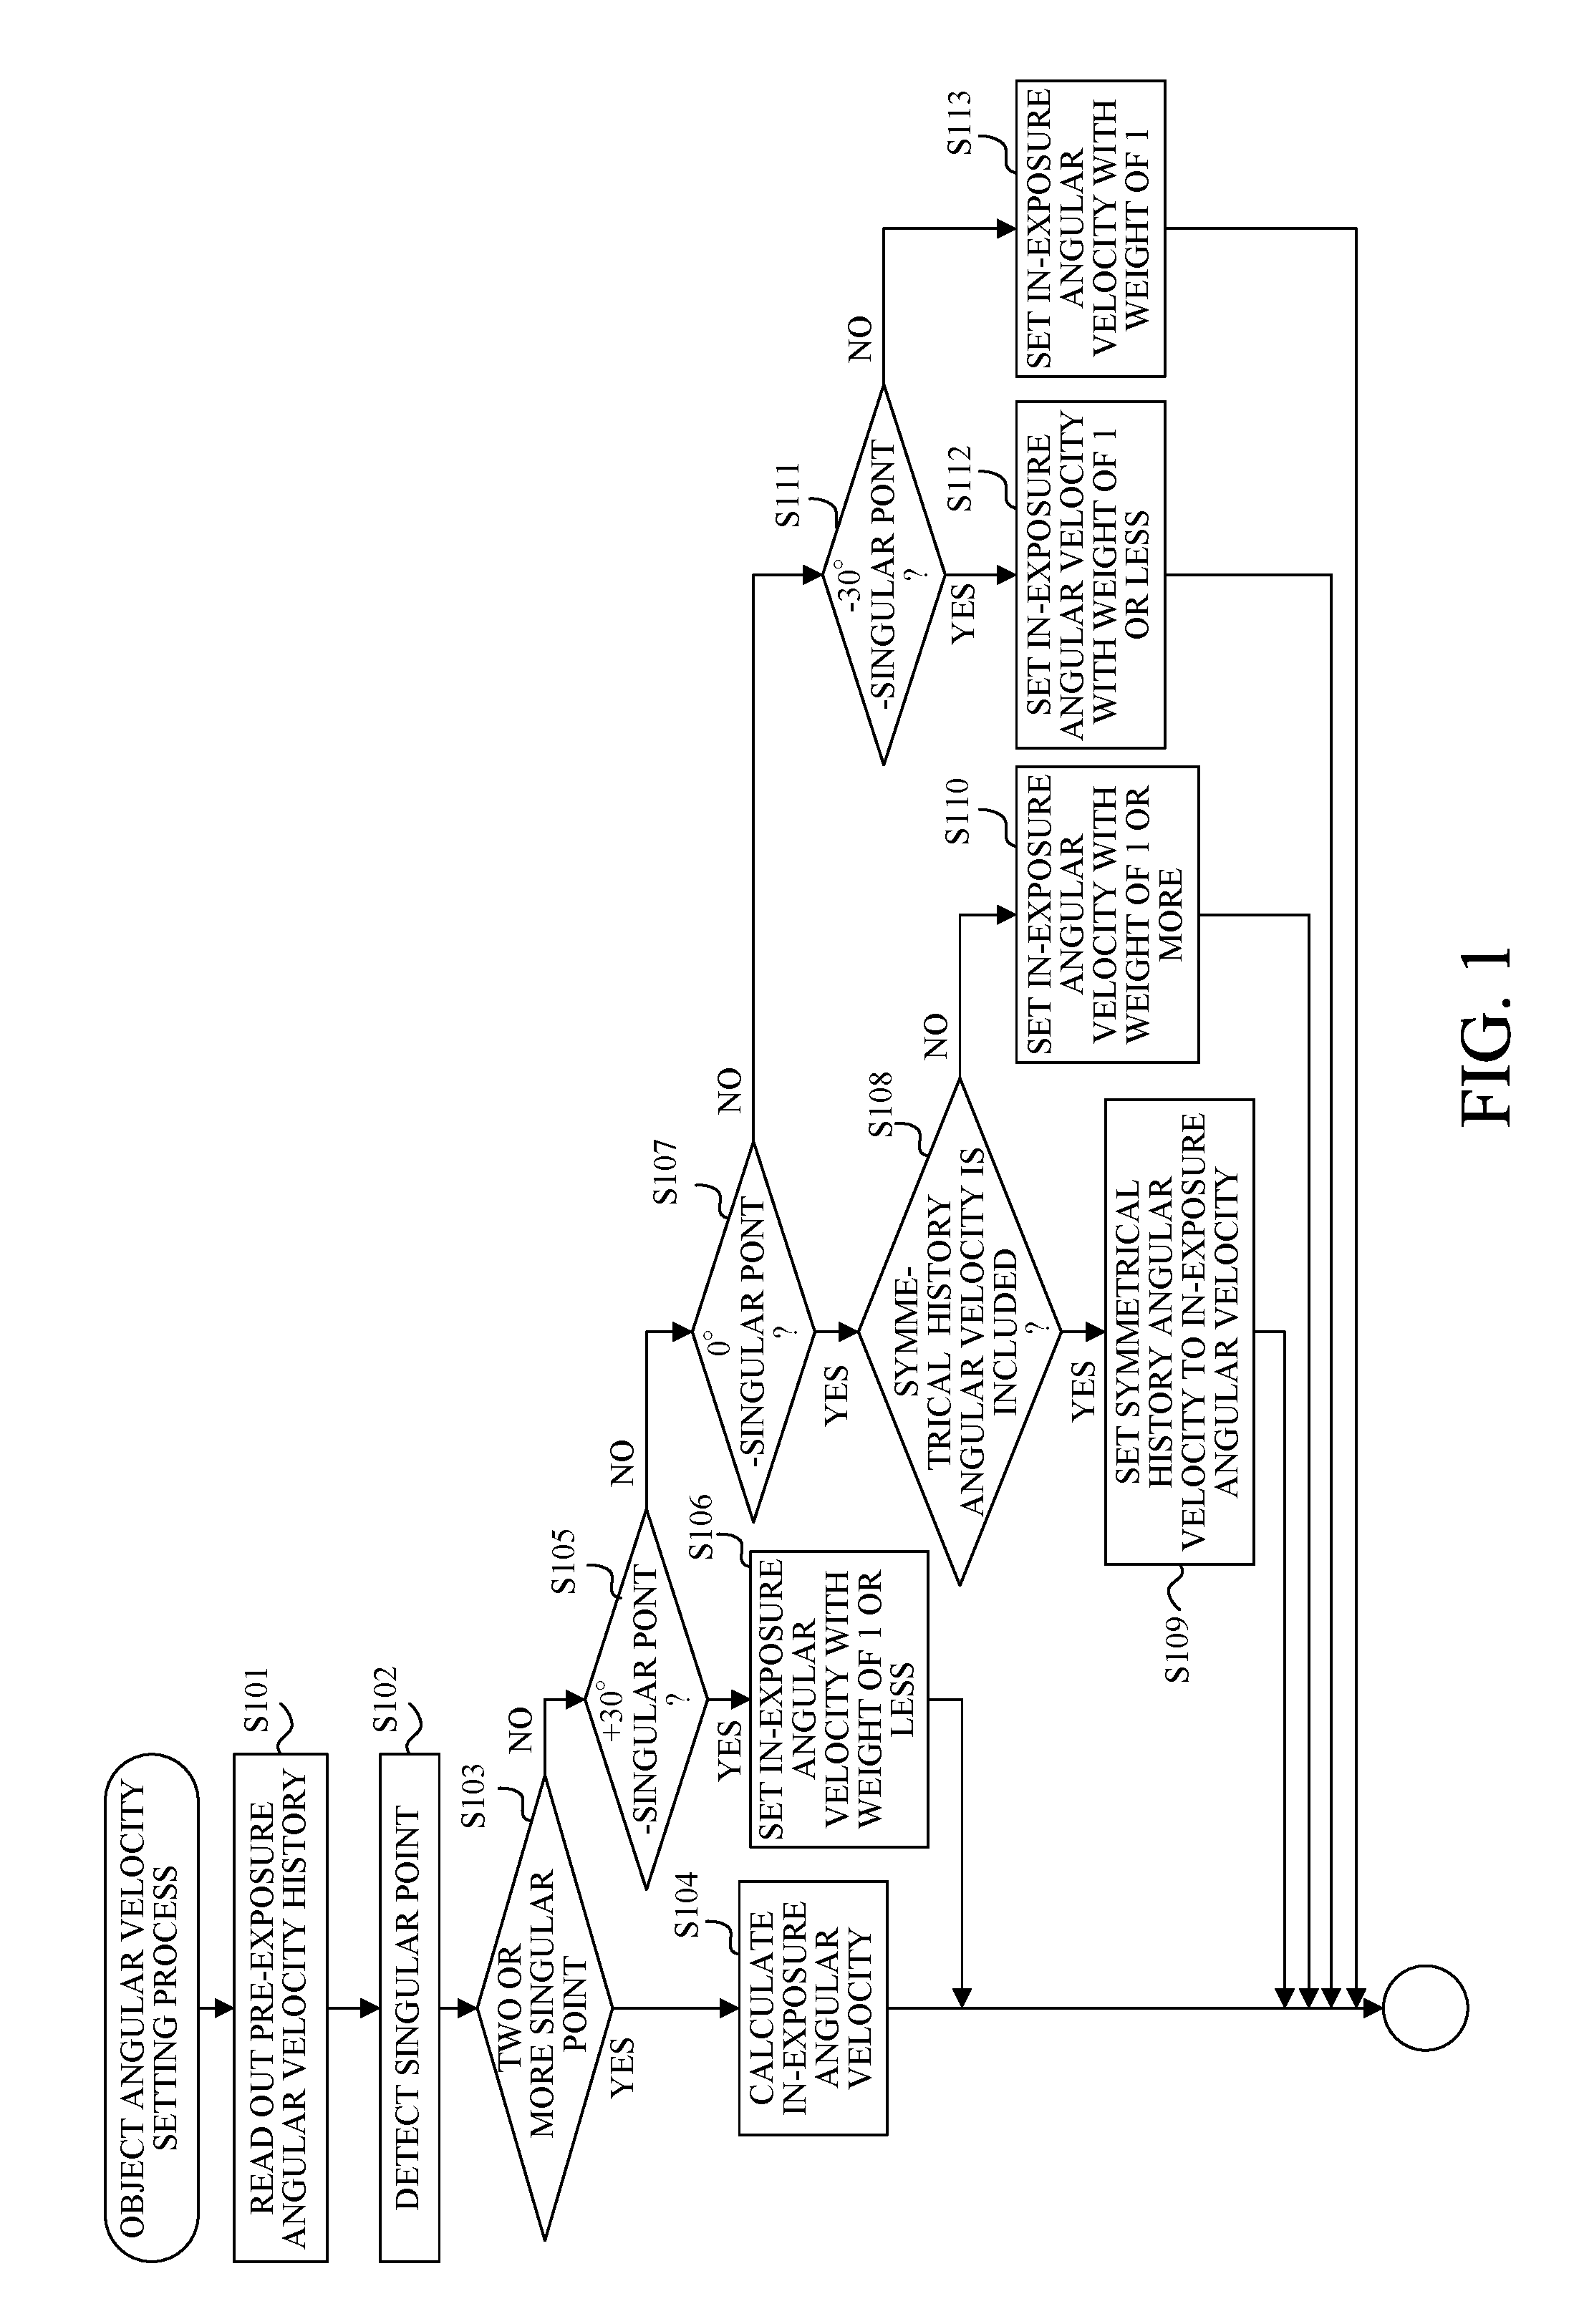 Image capturing apparatus, control method thereof and storage medium storing control program therefor